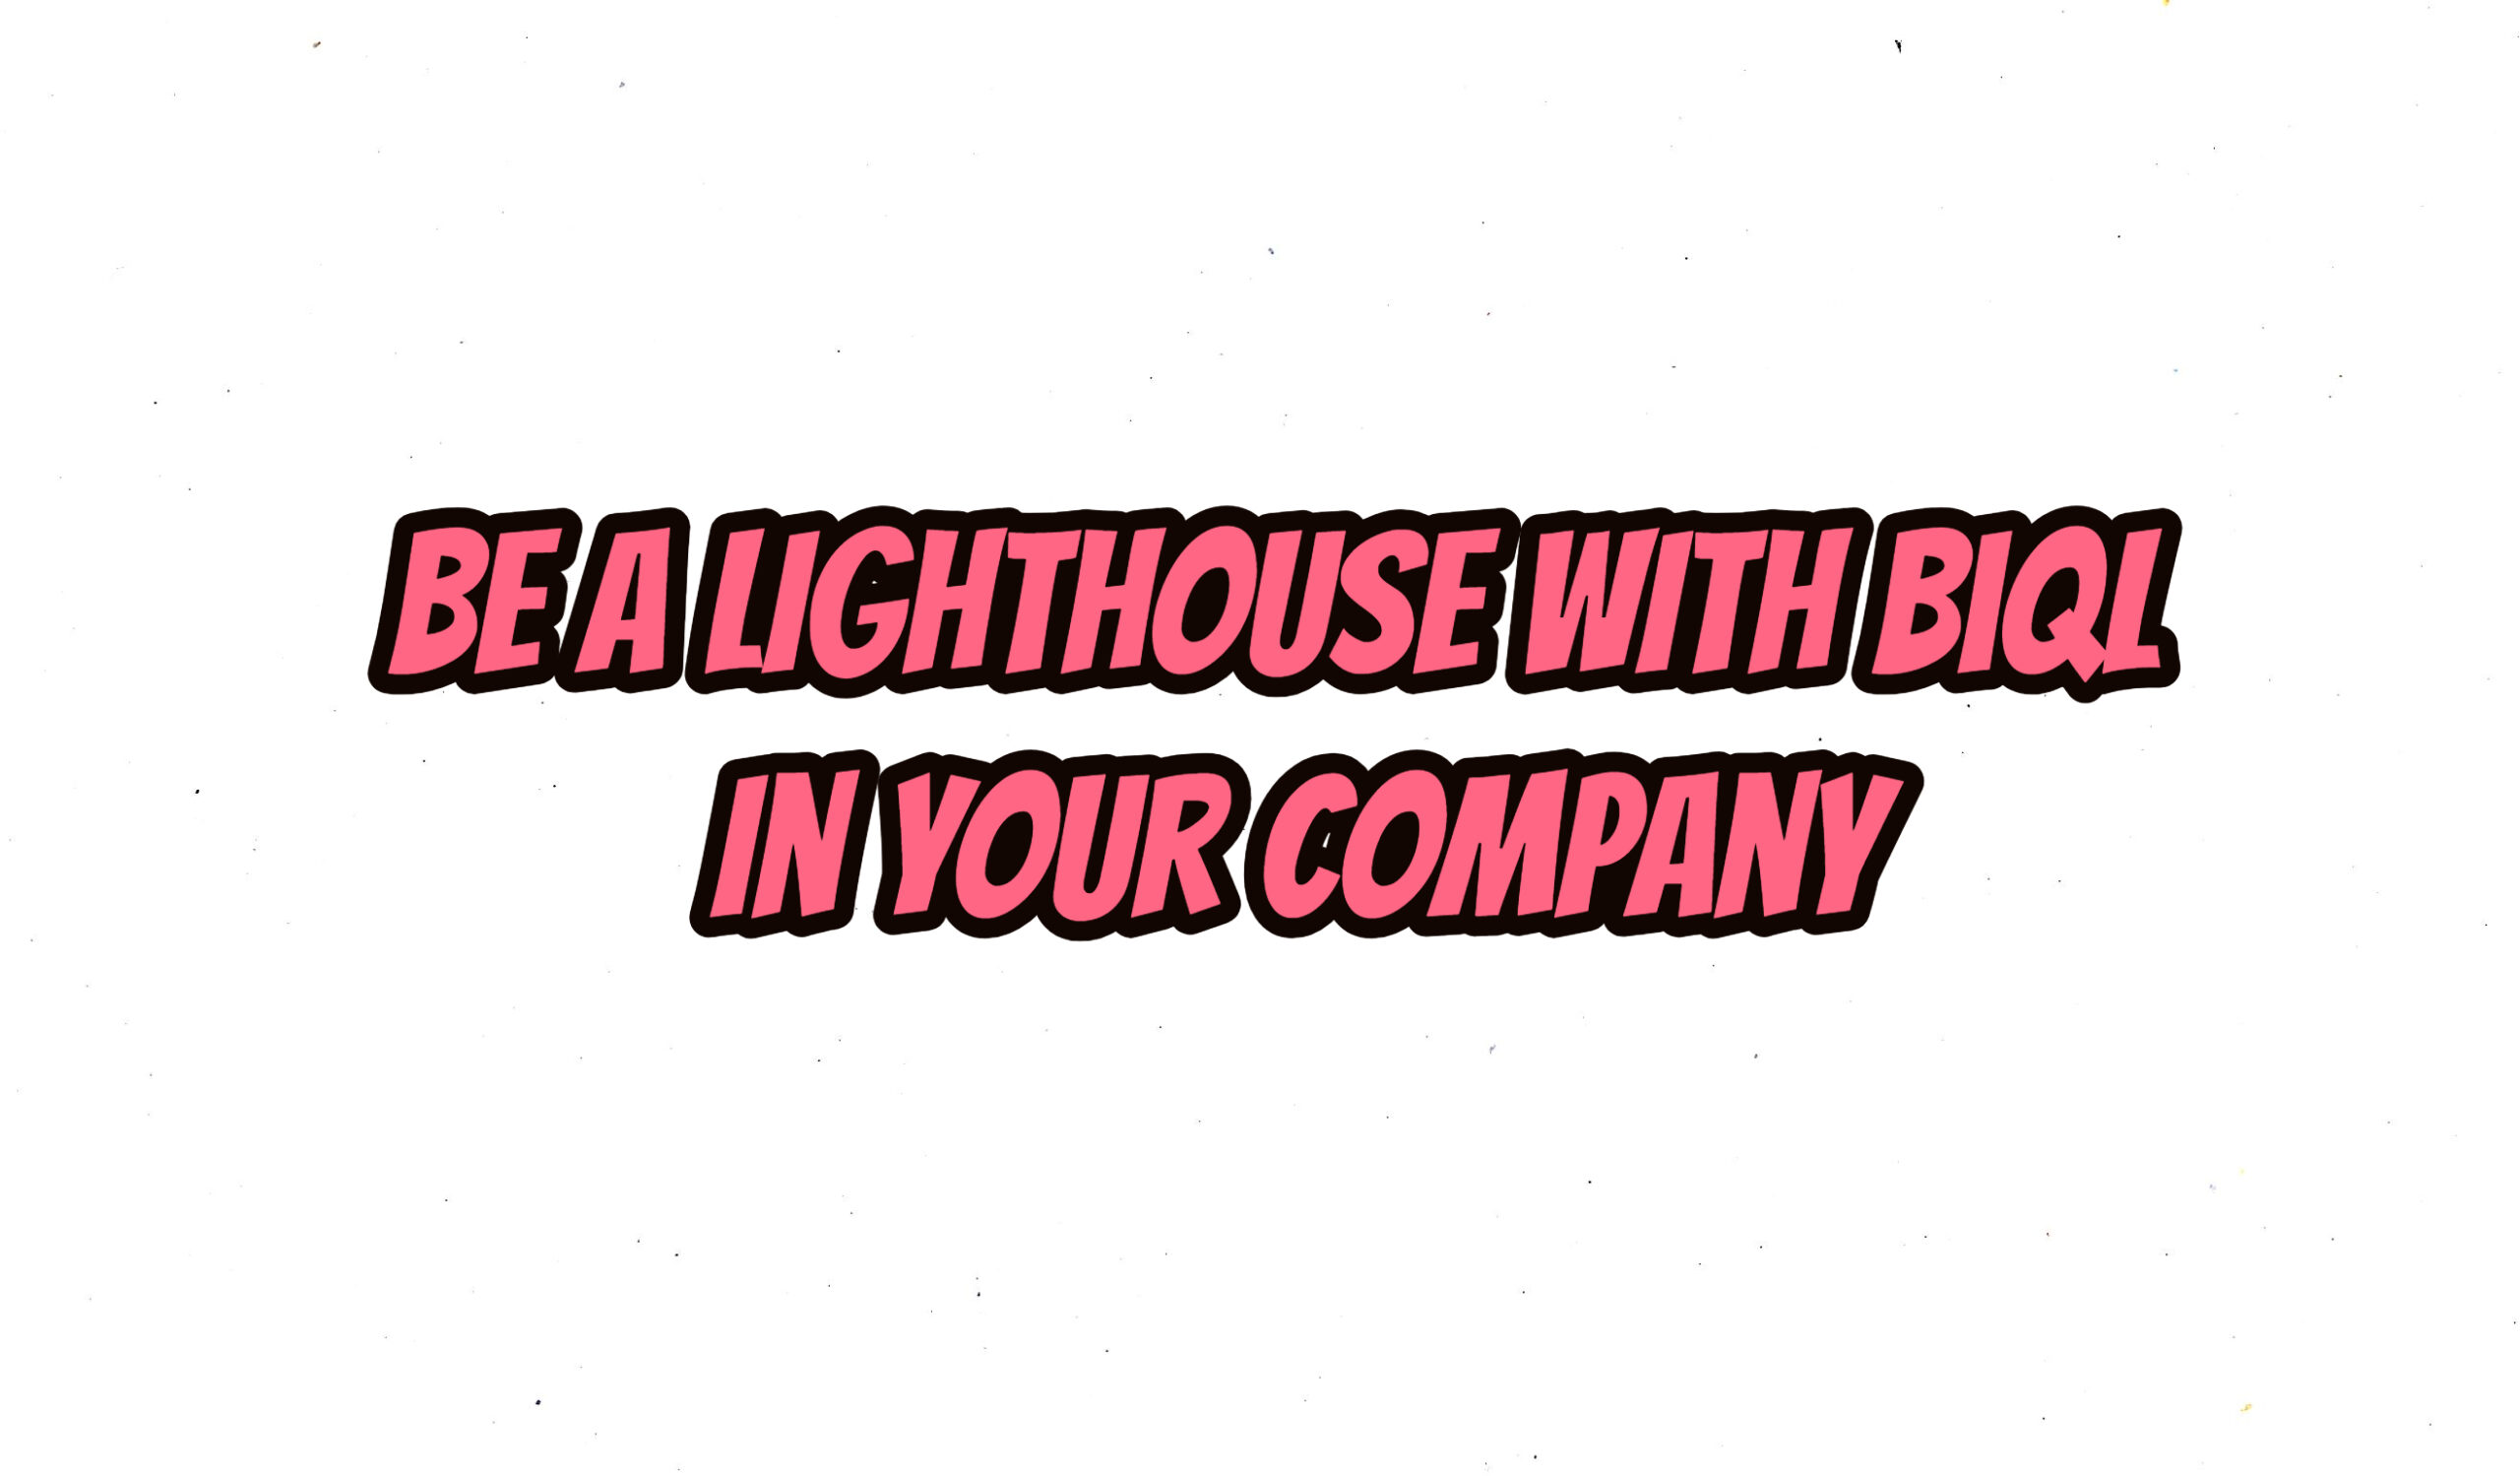 Be a lighthouse with bıql in your company